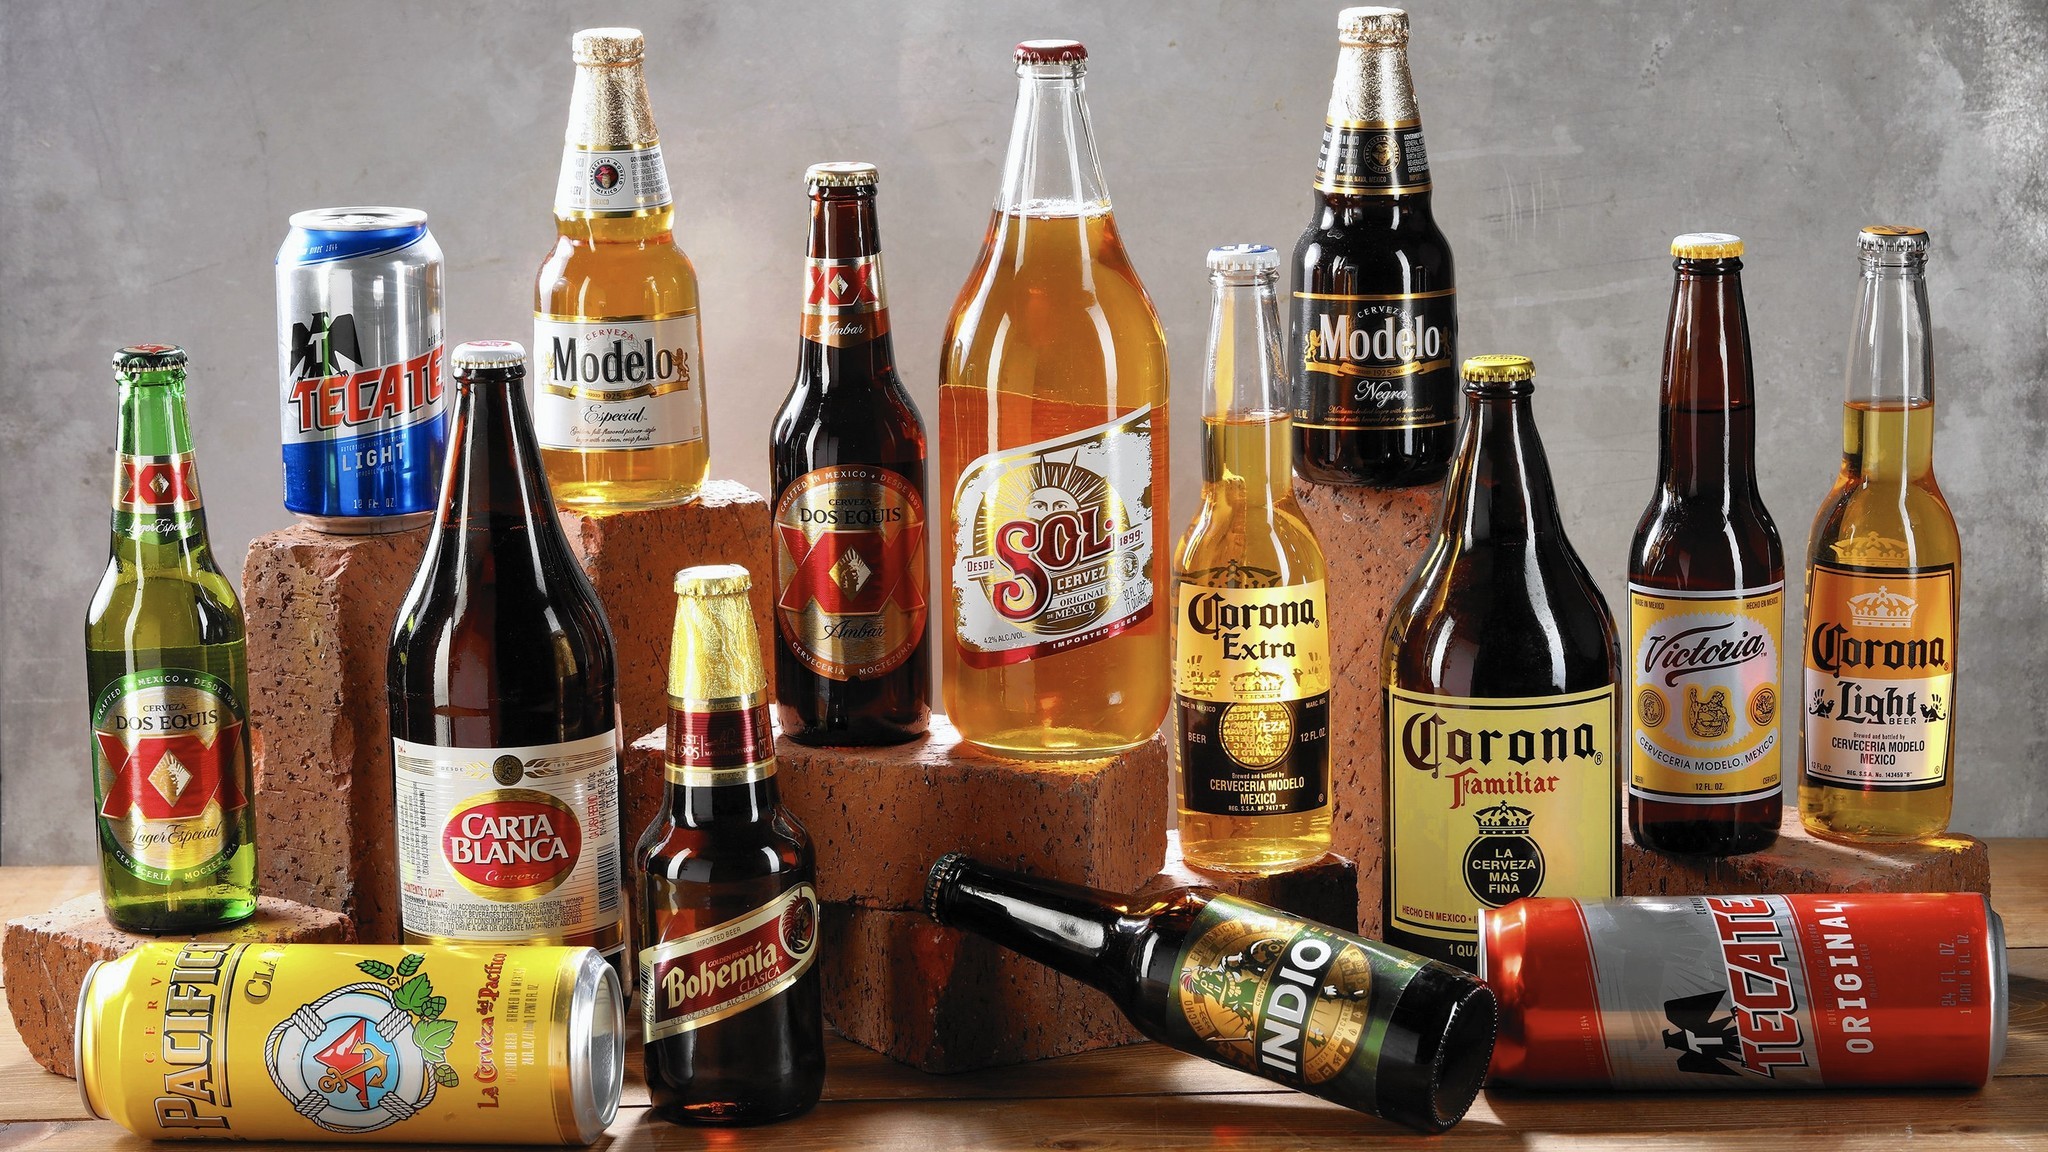 Corono the mexican beers marketing